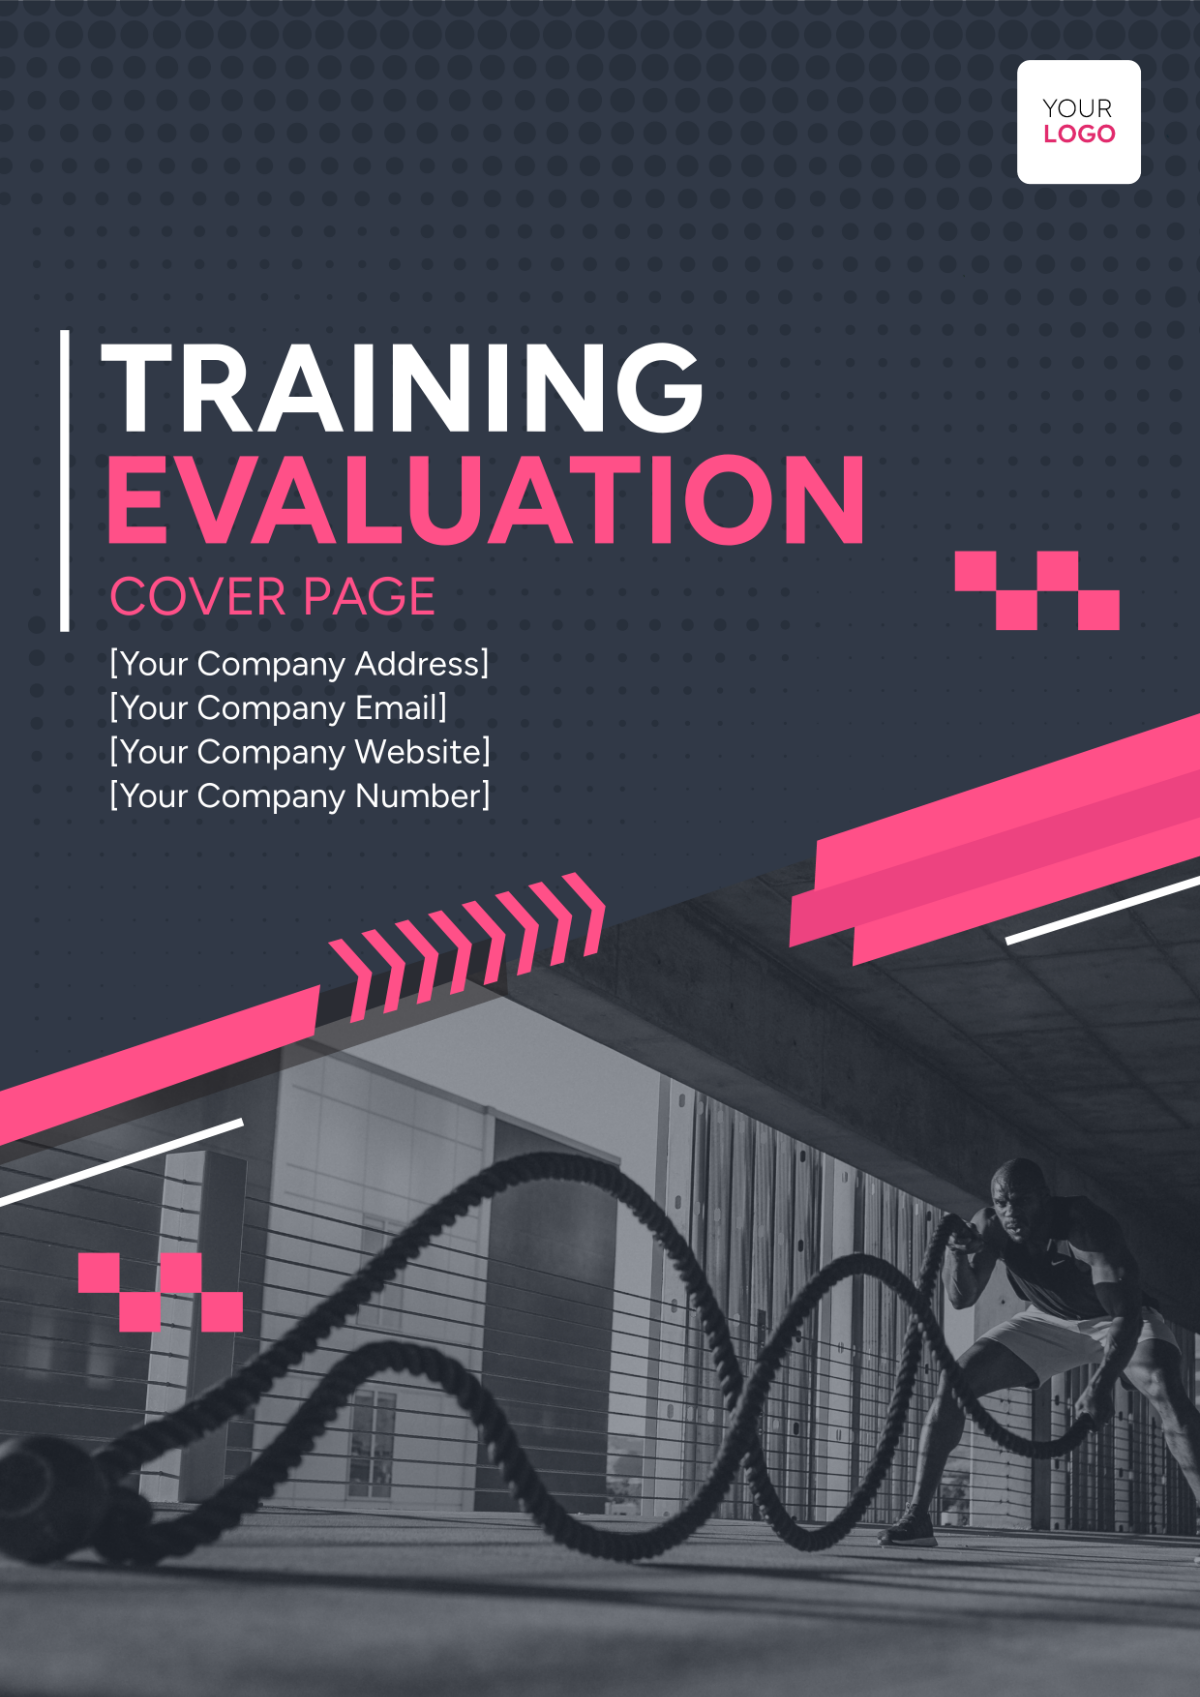 Training Evaluation Cover Page